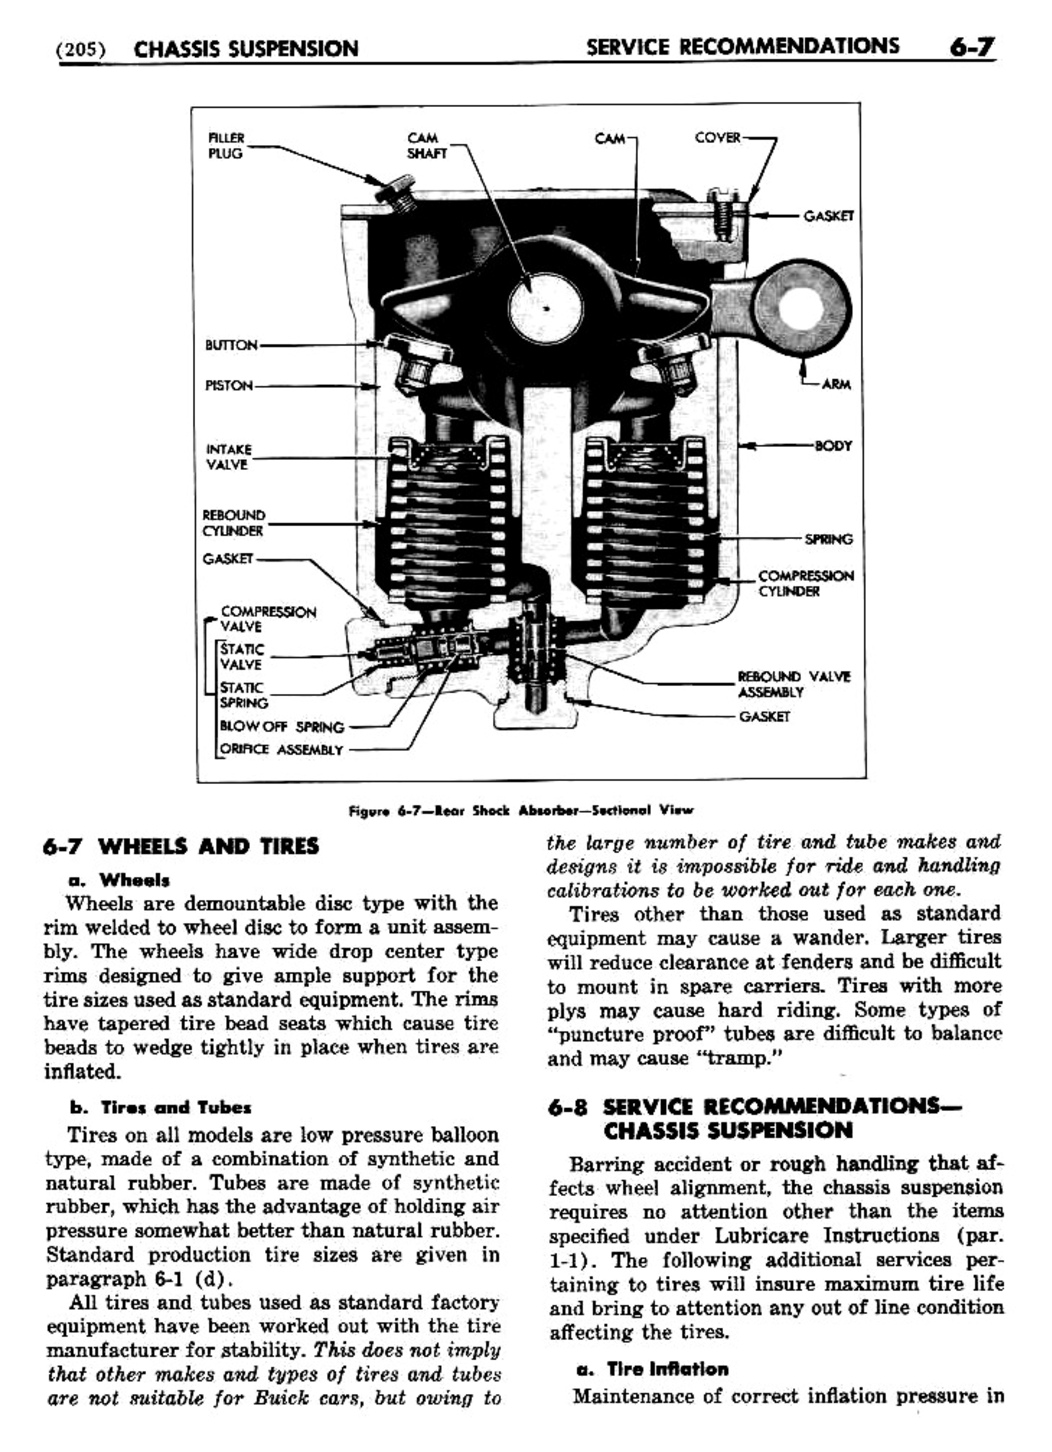 n_07 1948 Buick Shop Manual - Chassis Suspension-007-007.jpg